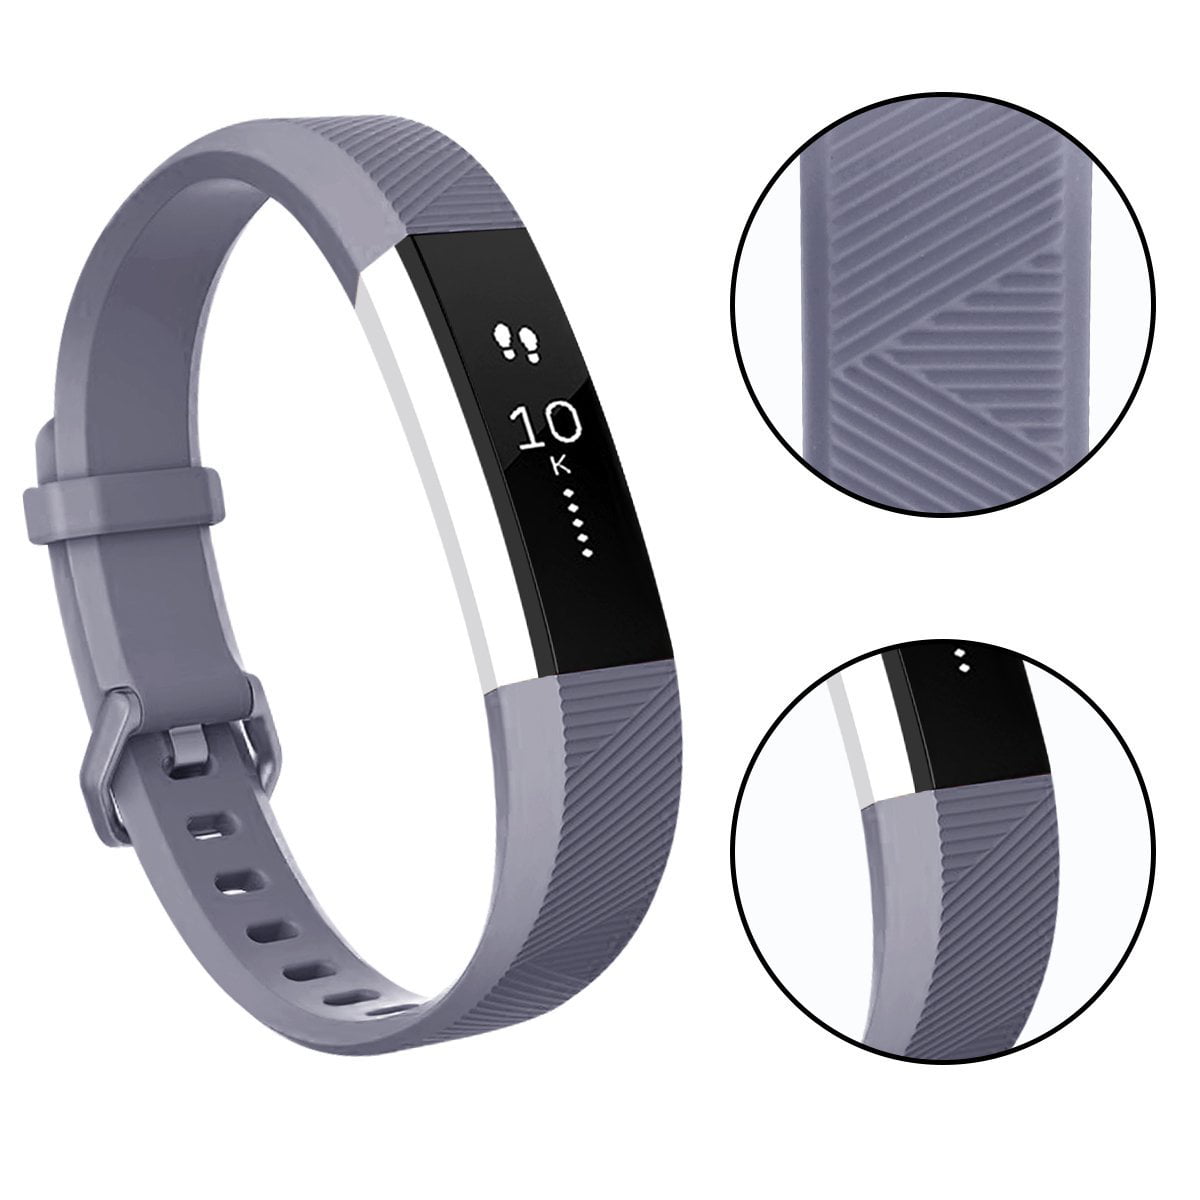 FREE SHIPPING Fitbit Alta/HR Classic Accessory Bands S *BRAND NEW* New 4 